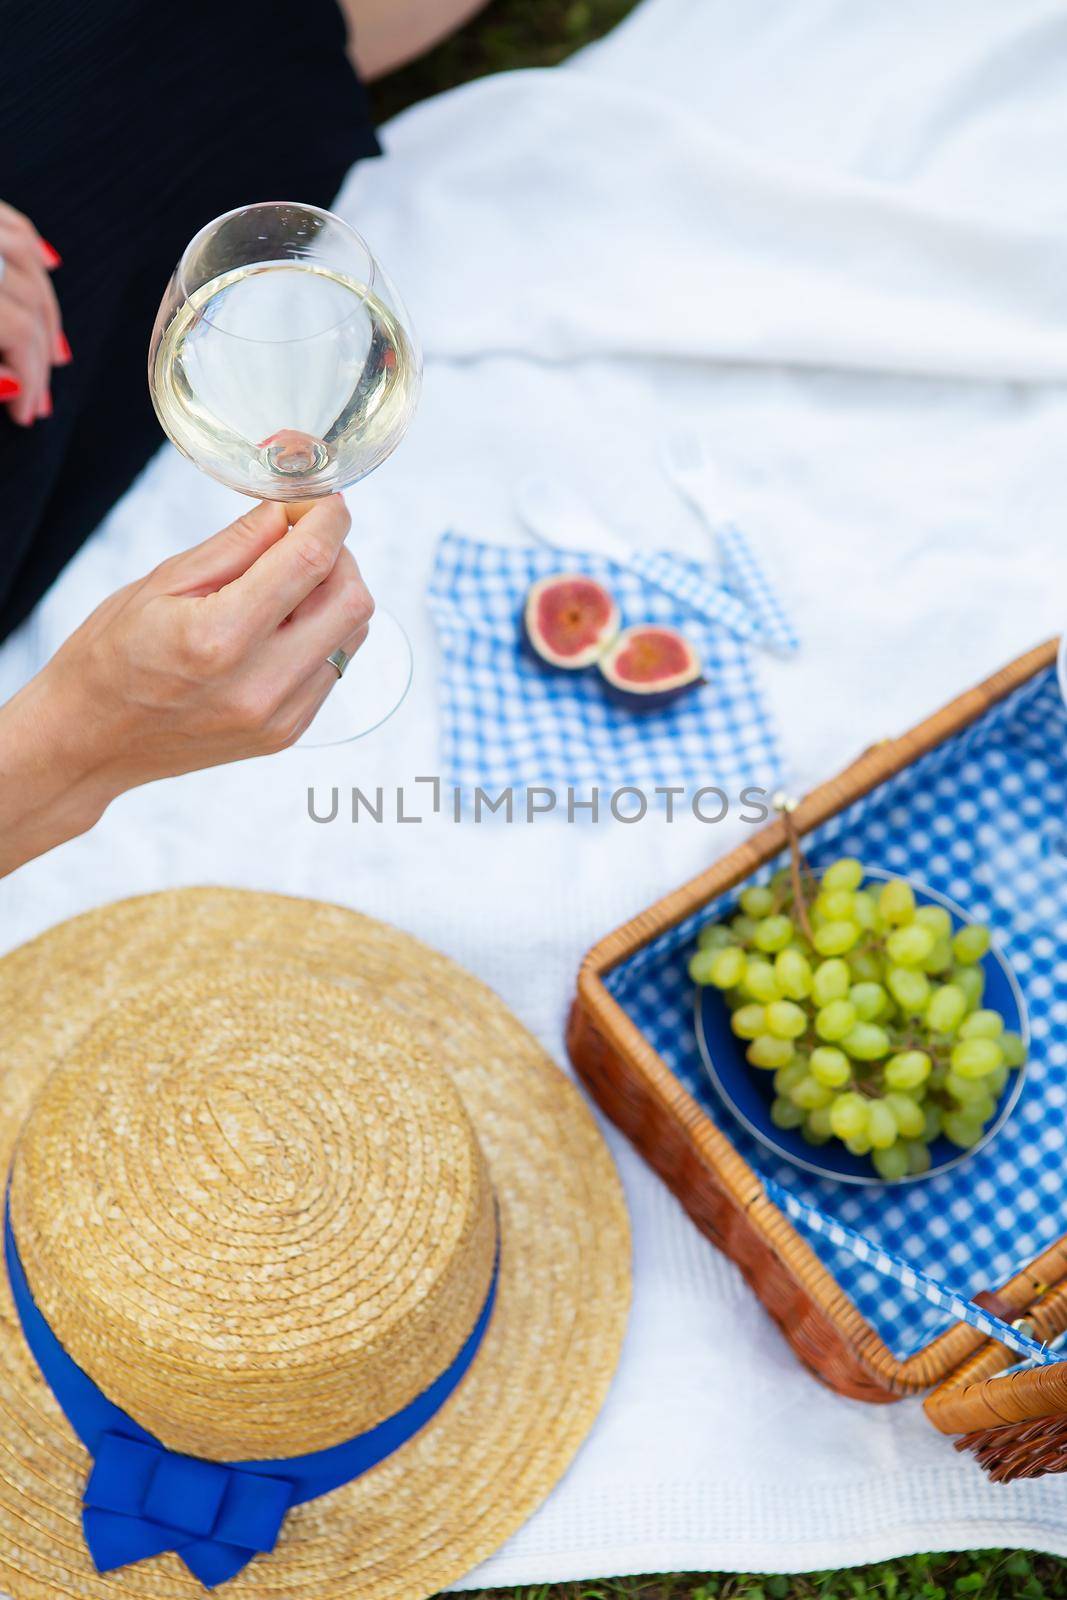 Romantic picnic in the park on the grass, delicious food: basket, wine, grapes, figs, cheese, blue checkered tablecloth, two glasses of wine. The girl is holding a glass of wine in her hands.The concept of outdoor recreation. by sfinks